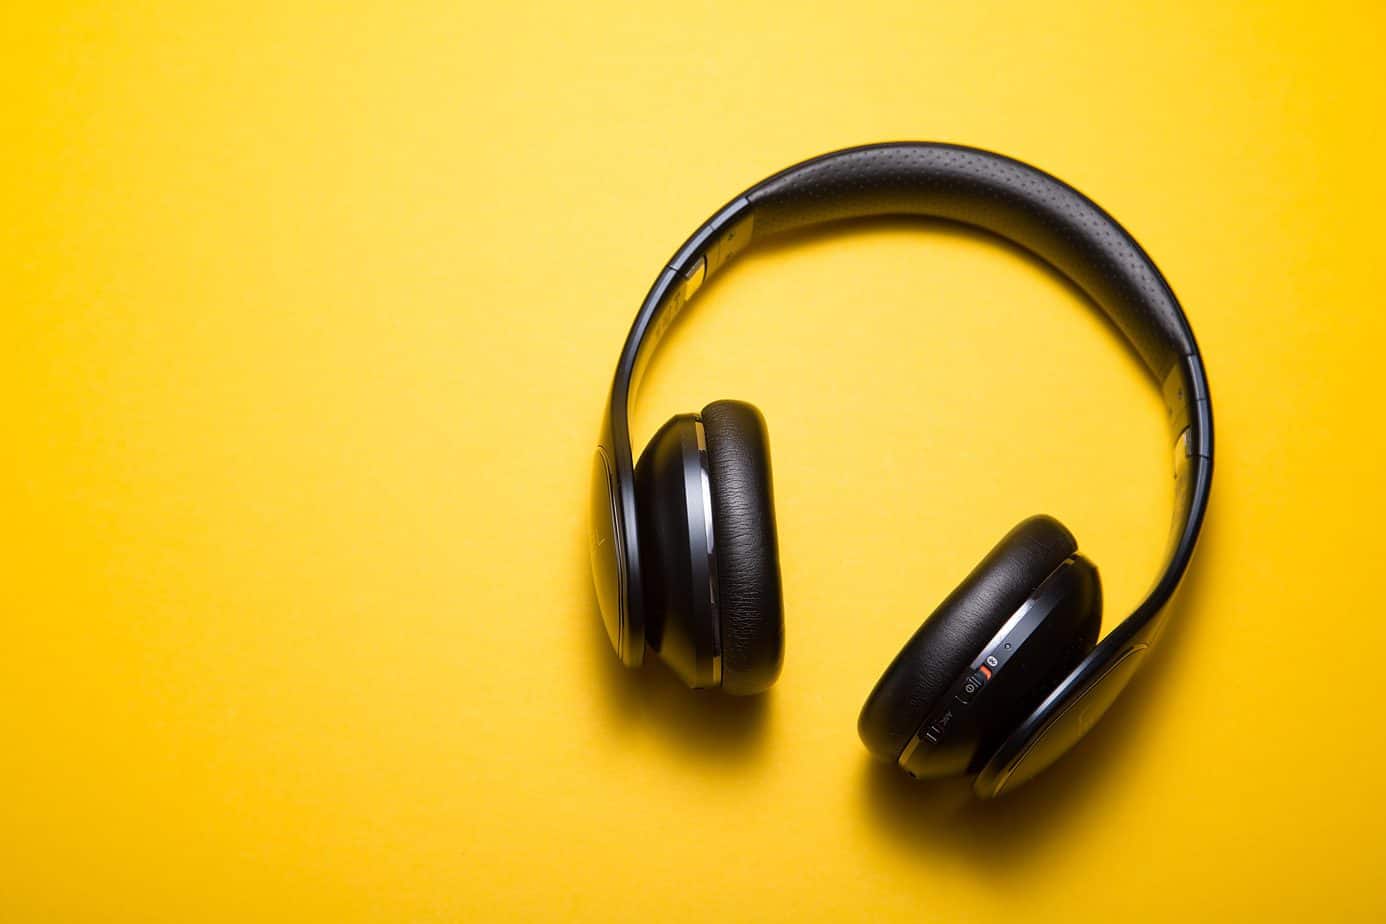 What Can Podcasts Teach Us?